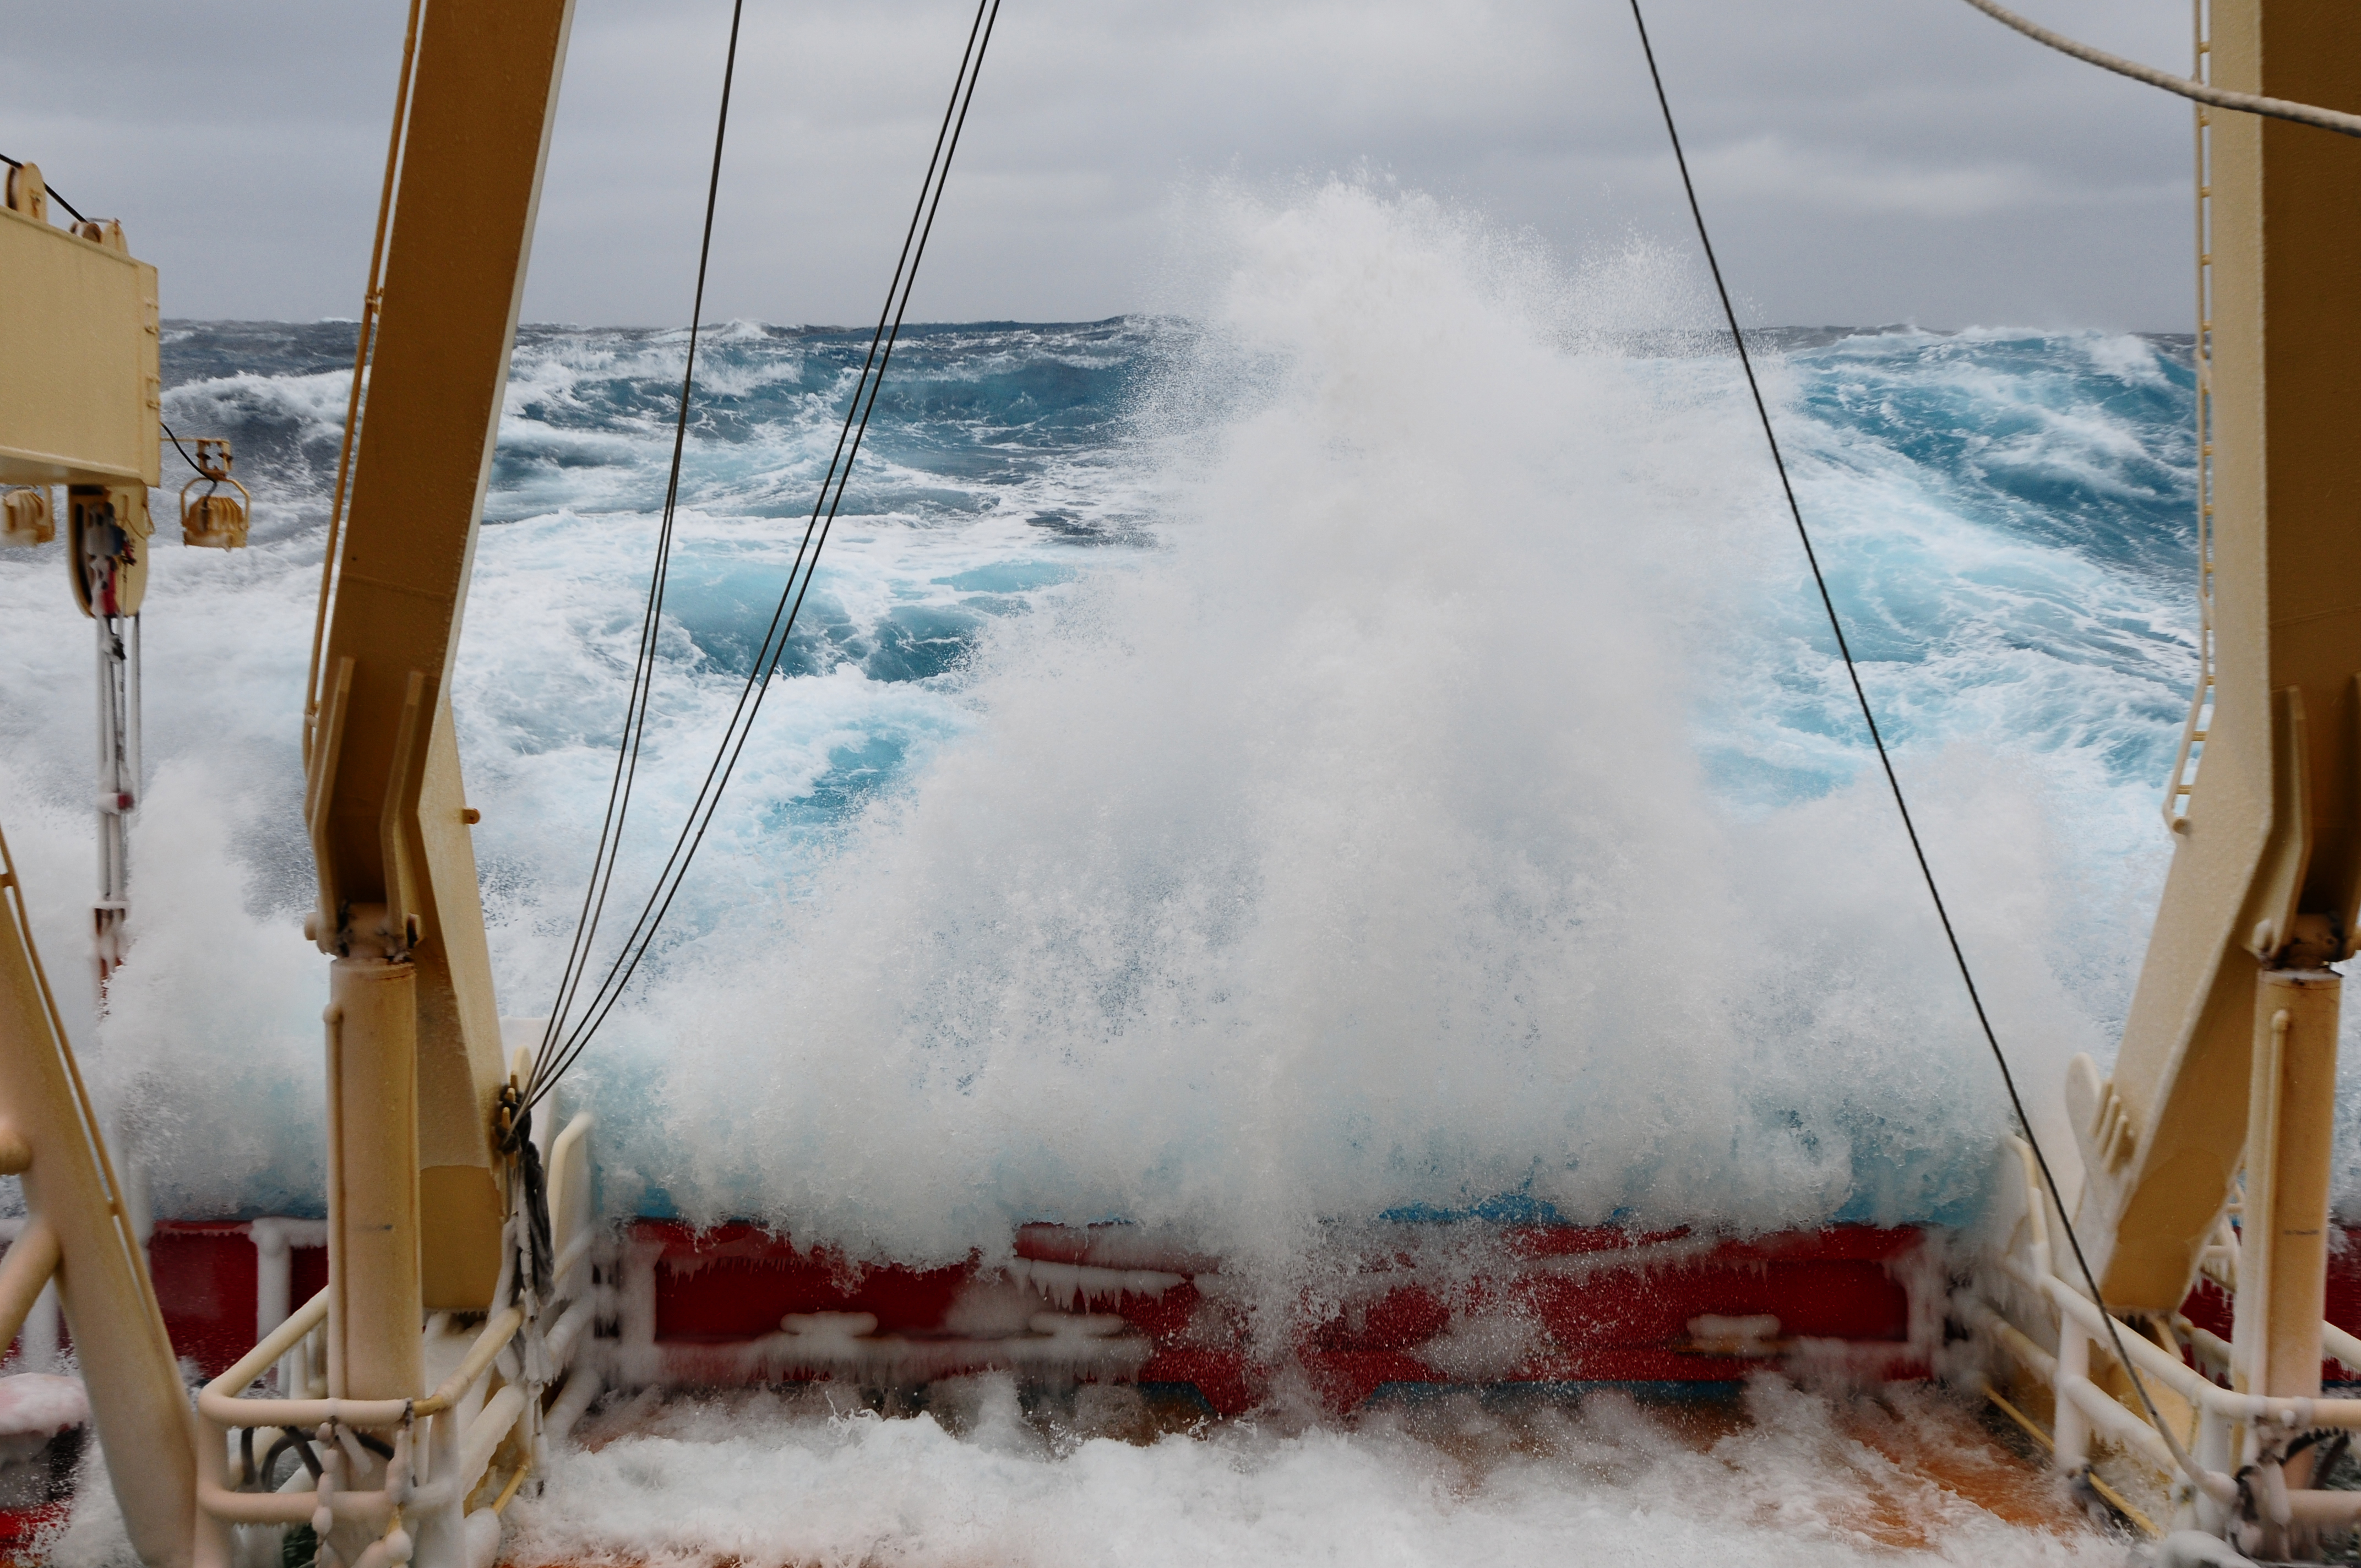 Ocean water rolling over a ship deck.